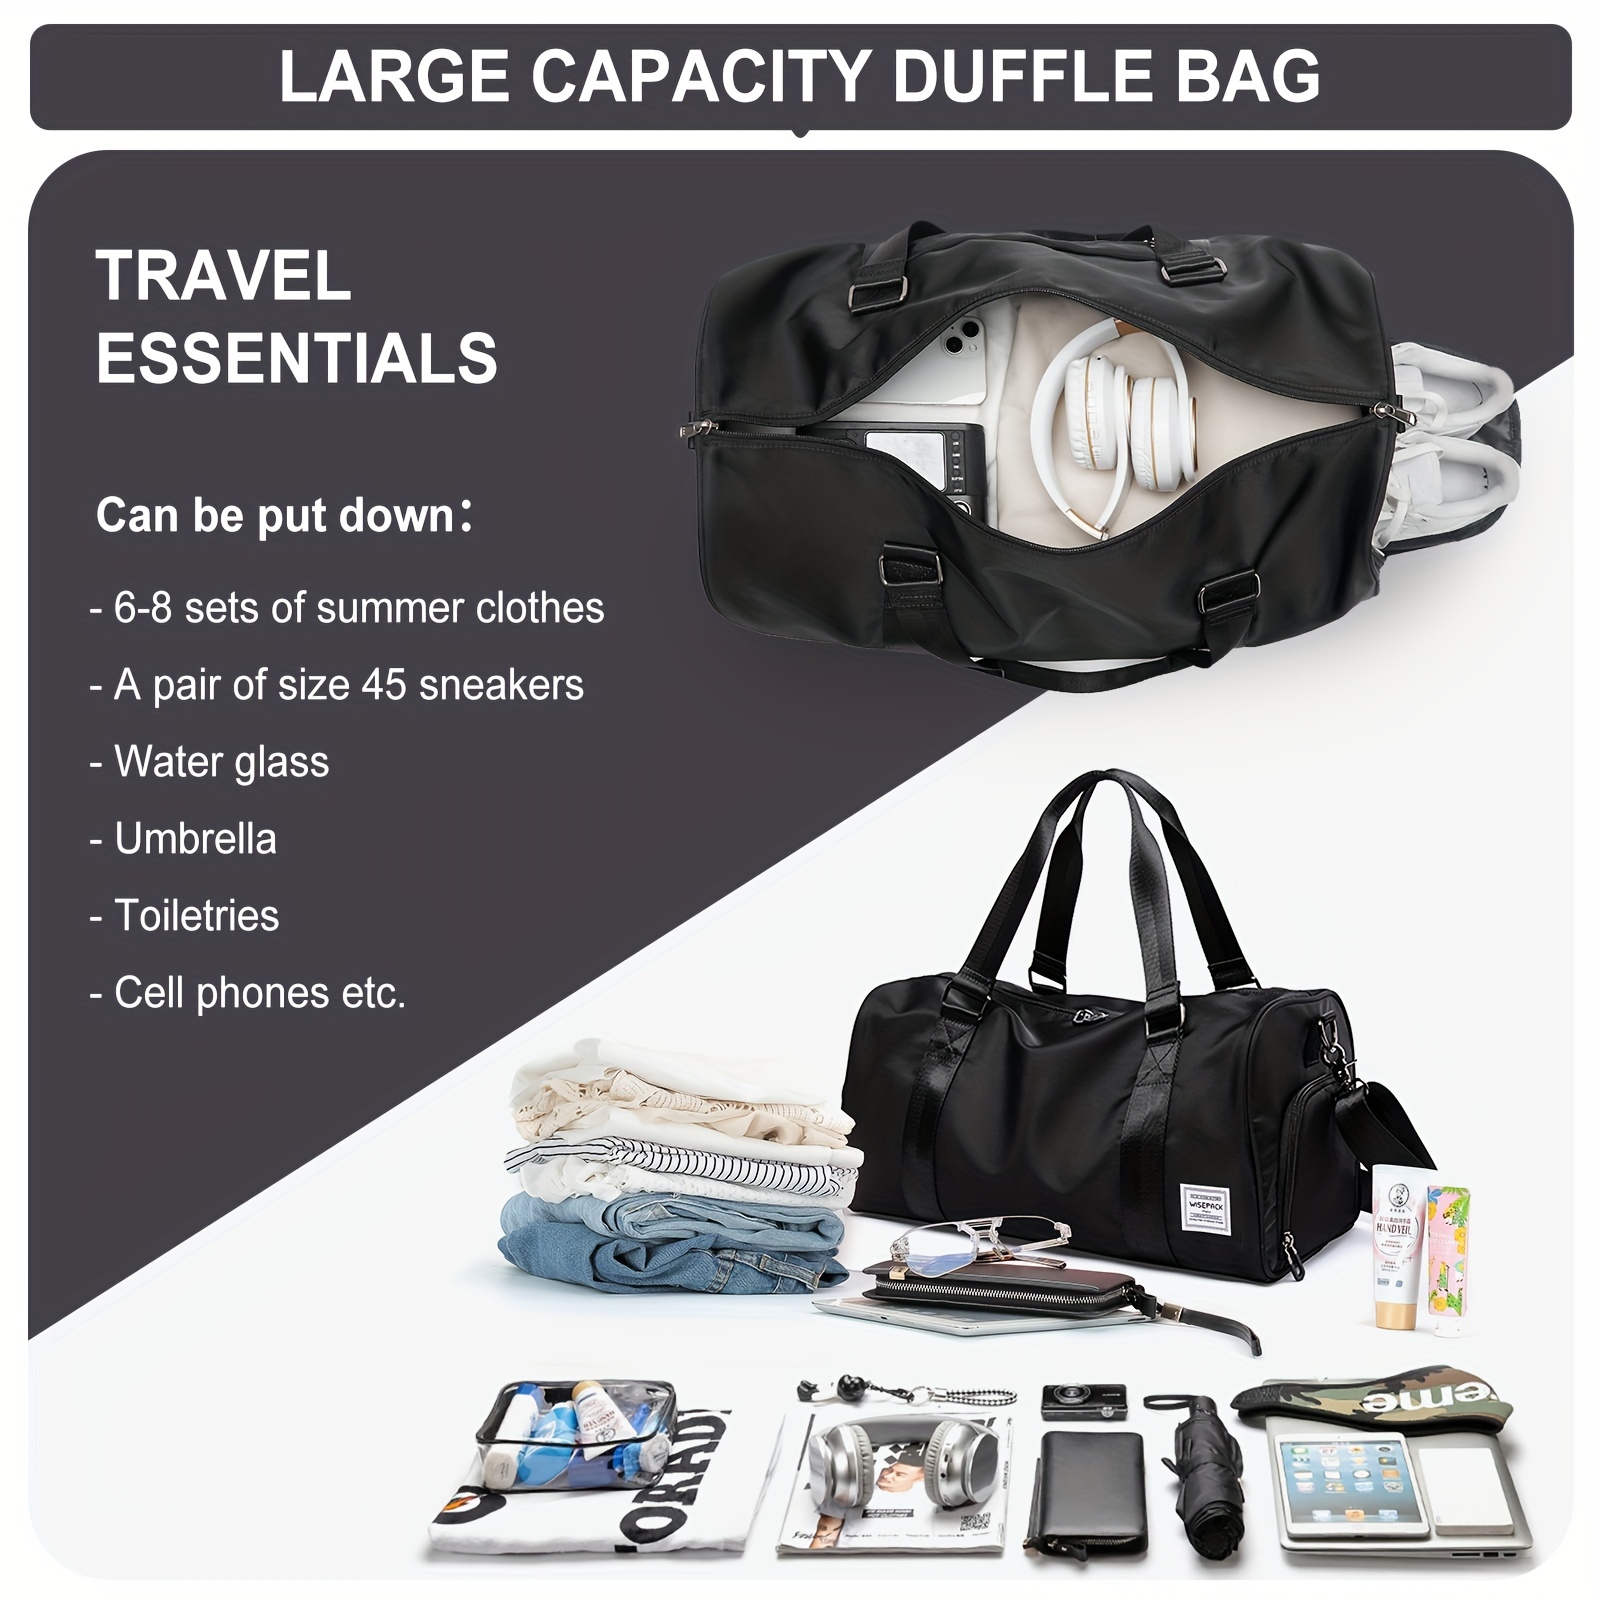 Large-capacity Travel Bag Training Bag Dry and Wet Separation